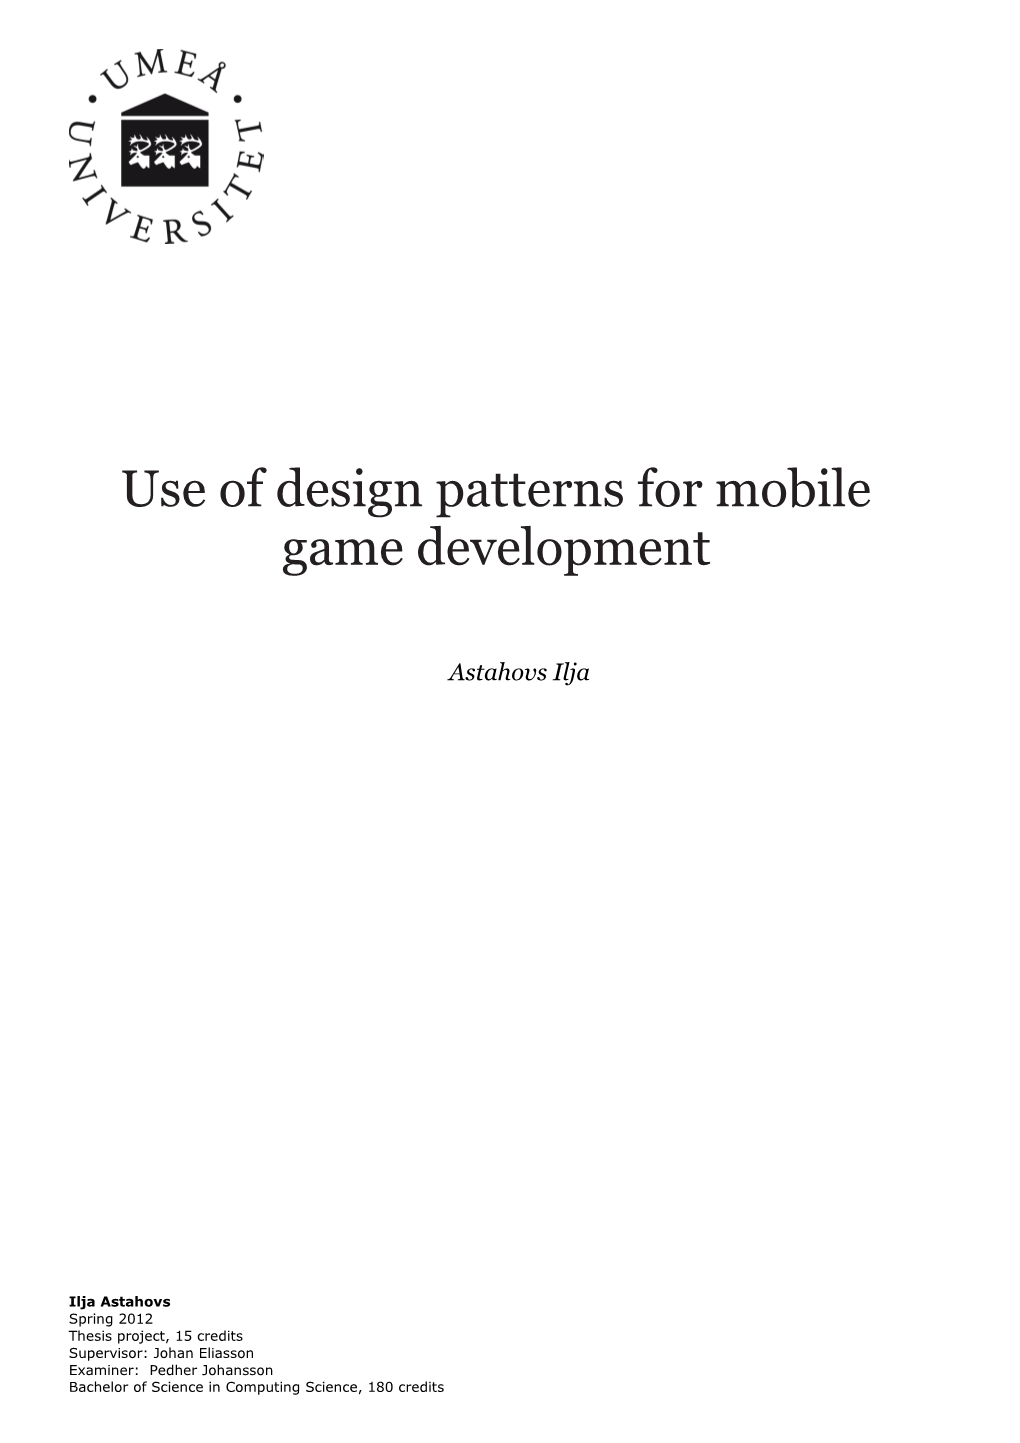 Use of Design Patterns for Mobile Game Development